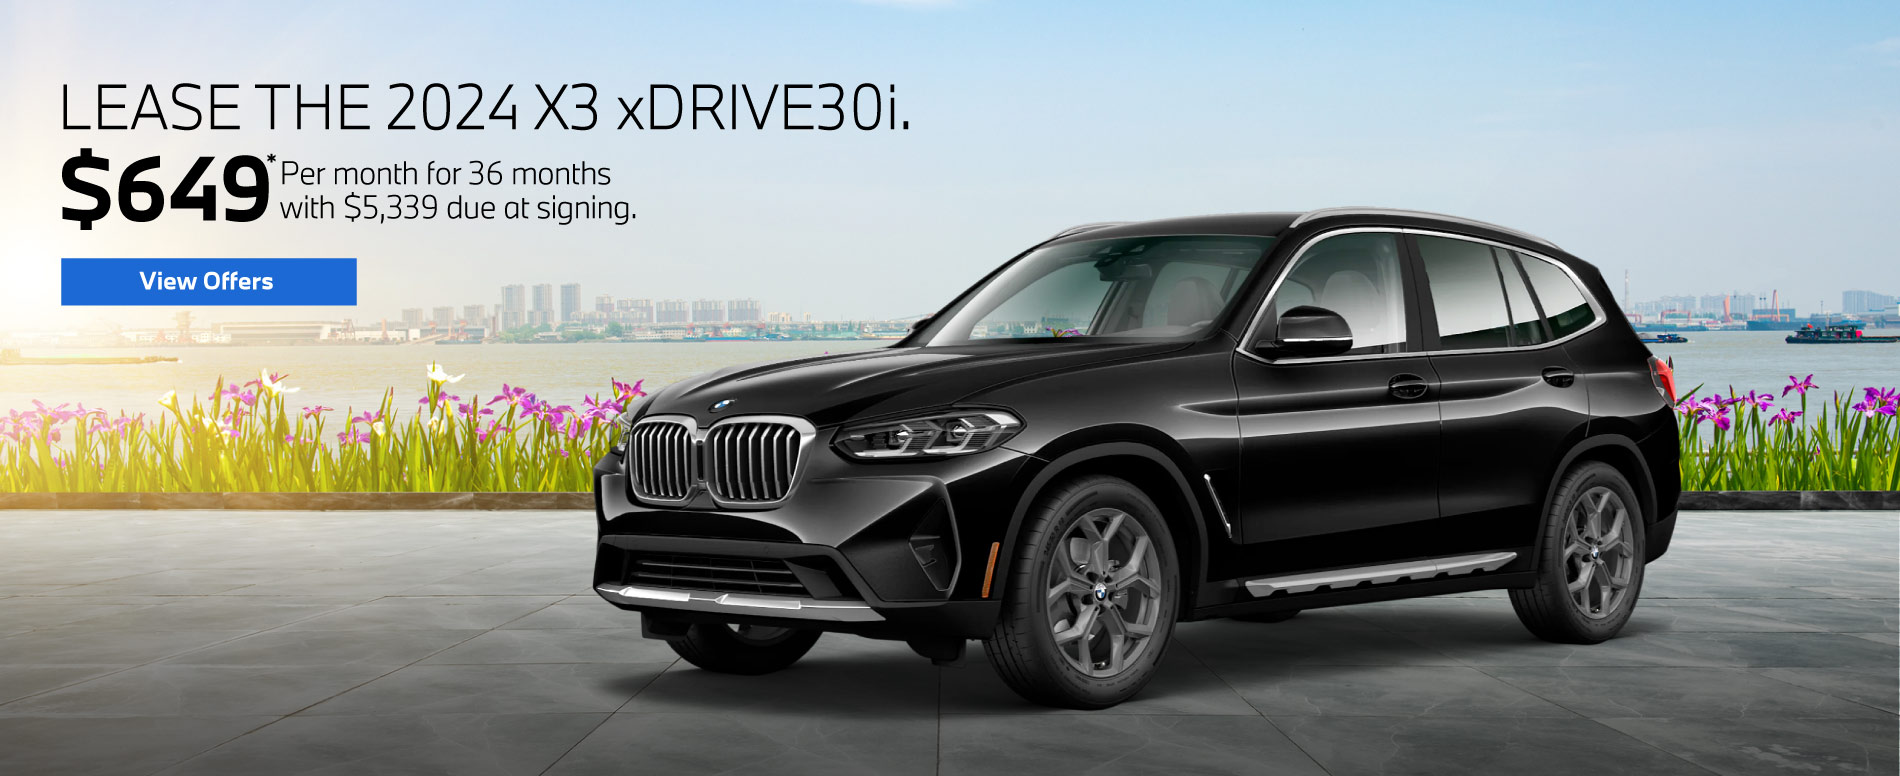 Lease the 2024 X3 xDrive30i - $649 per month* - View Offers